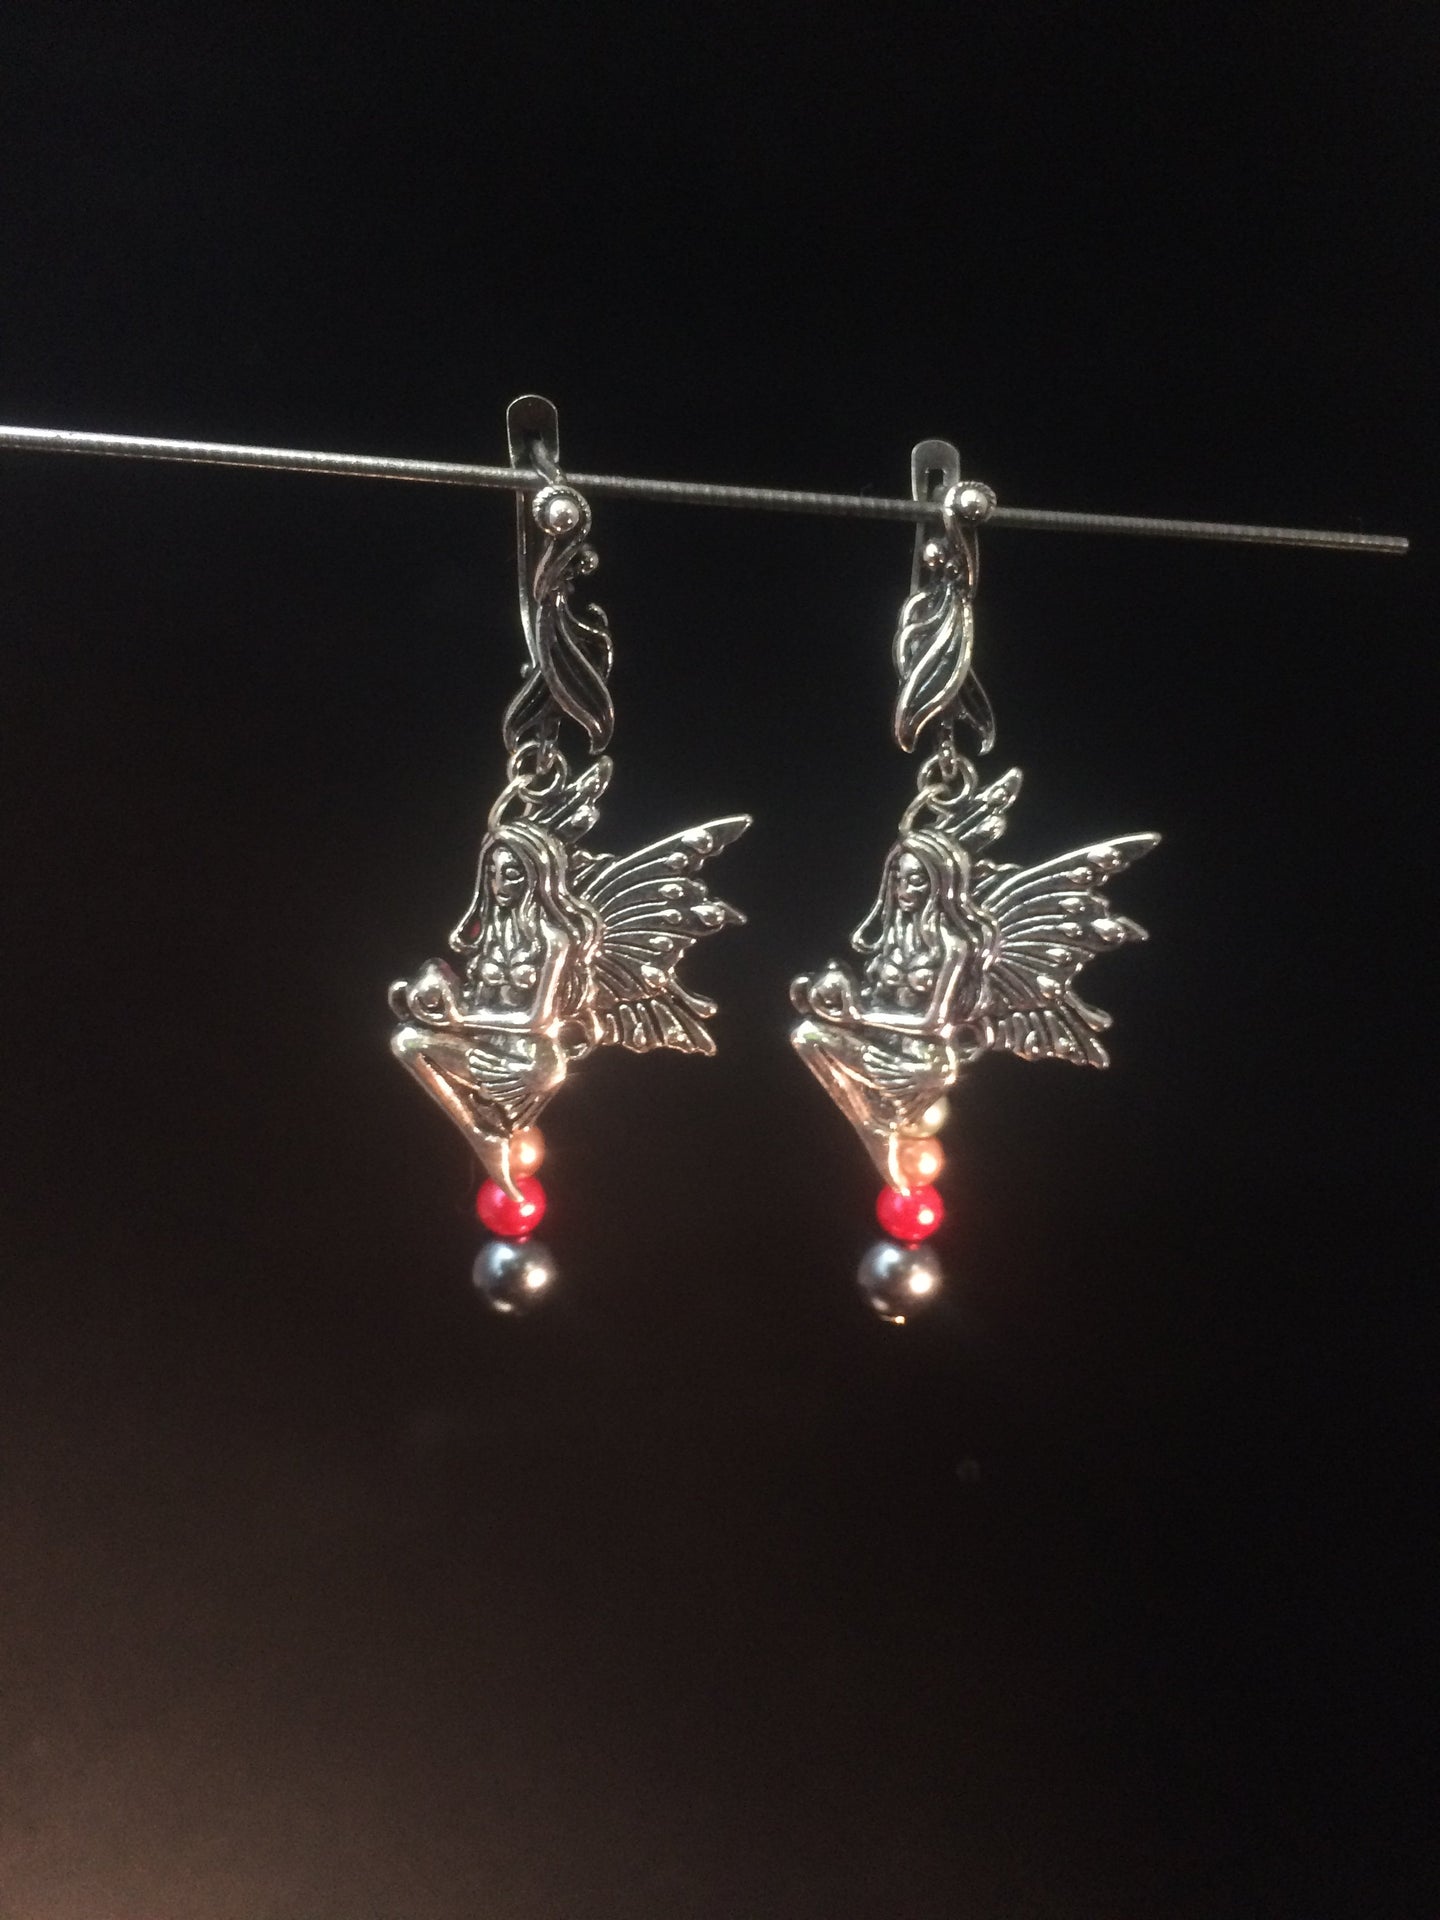 Leverback earrings made with plated metal charms and glass beads (faceted beads and glass pearls)